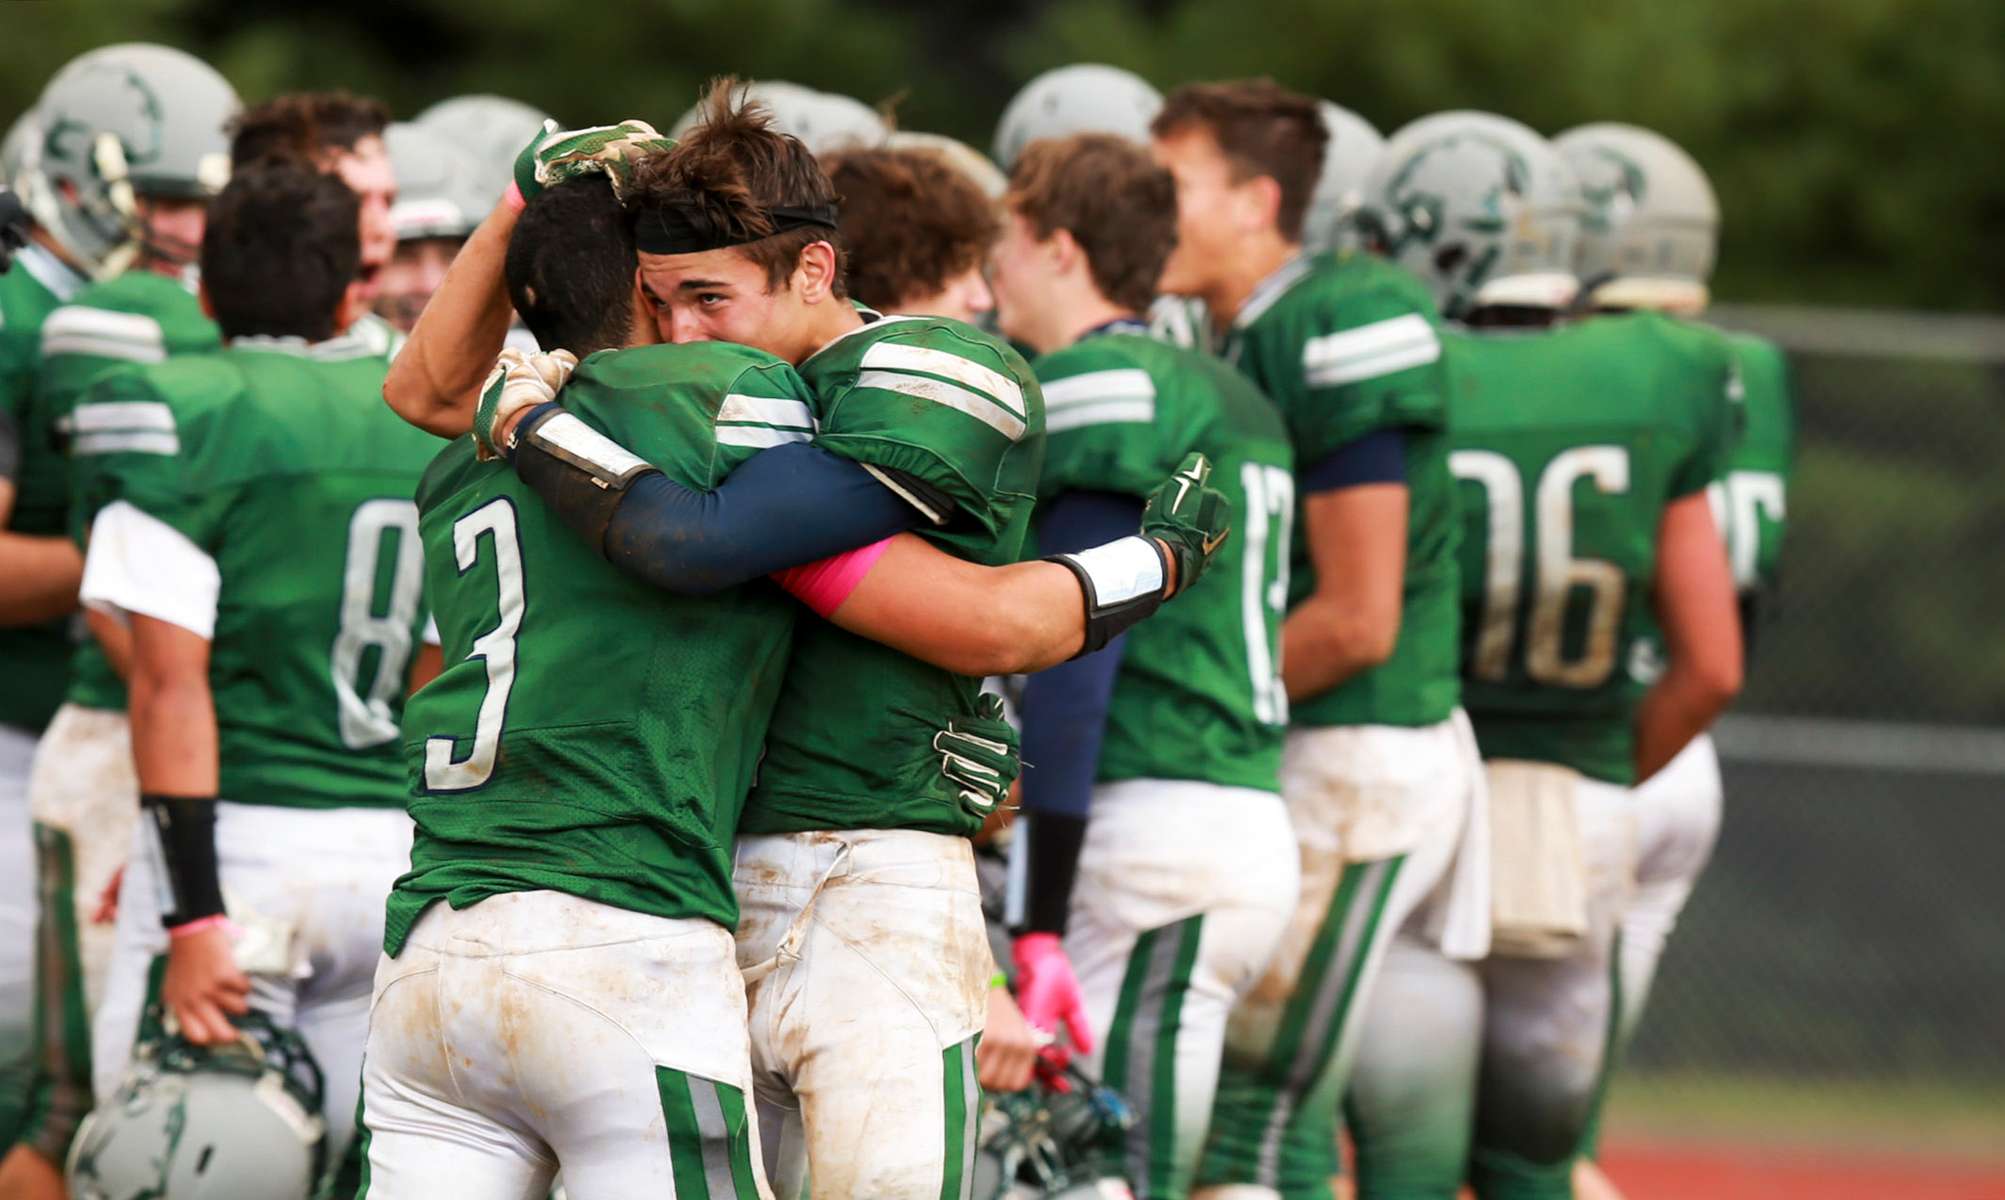 Joe Barsky embraces a Colts Neck High School football player to celebrate a rare win 20-14 over rival Marlboro. They finished the season 3-7.